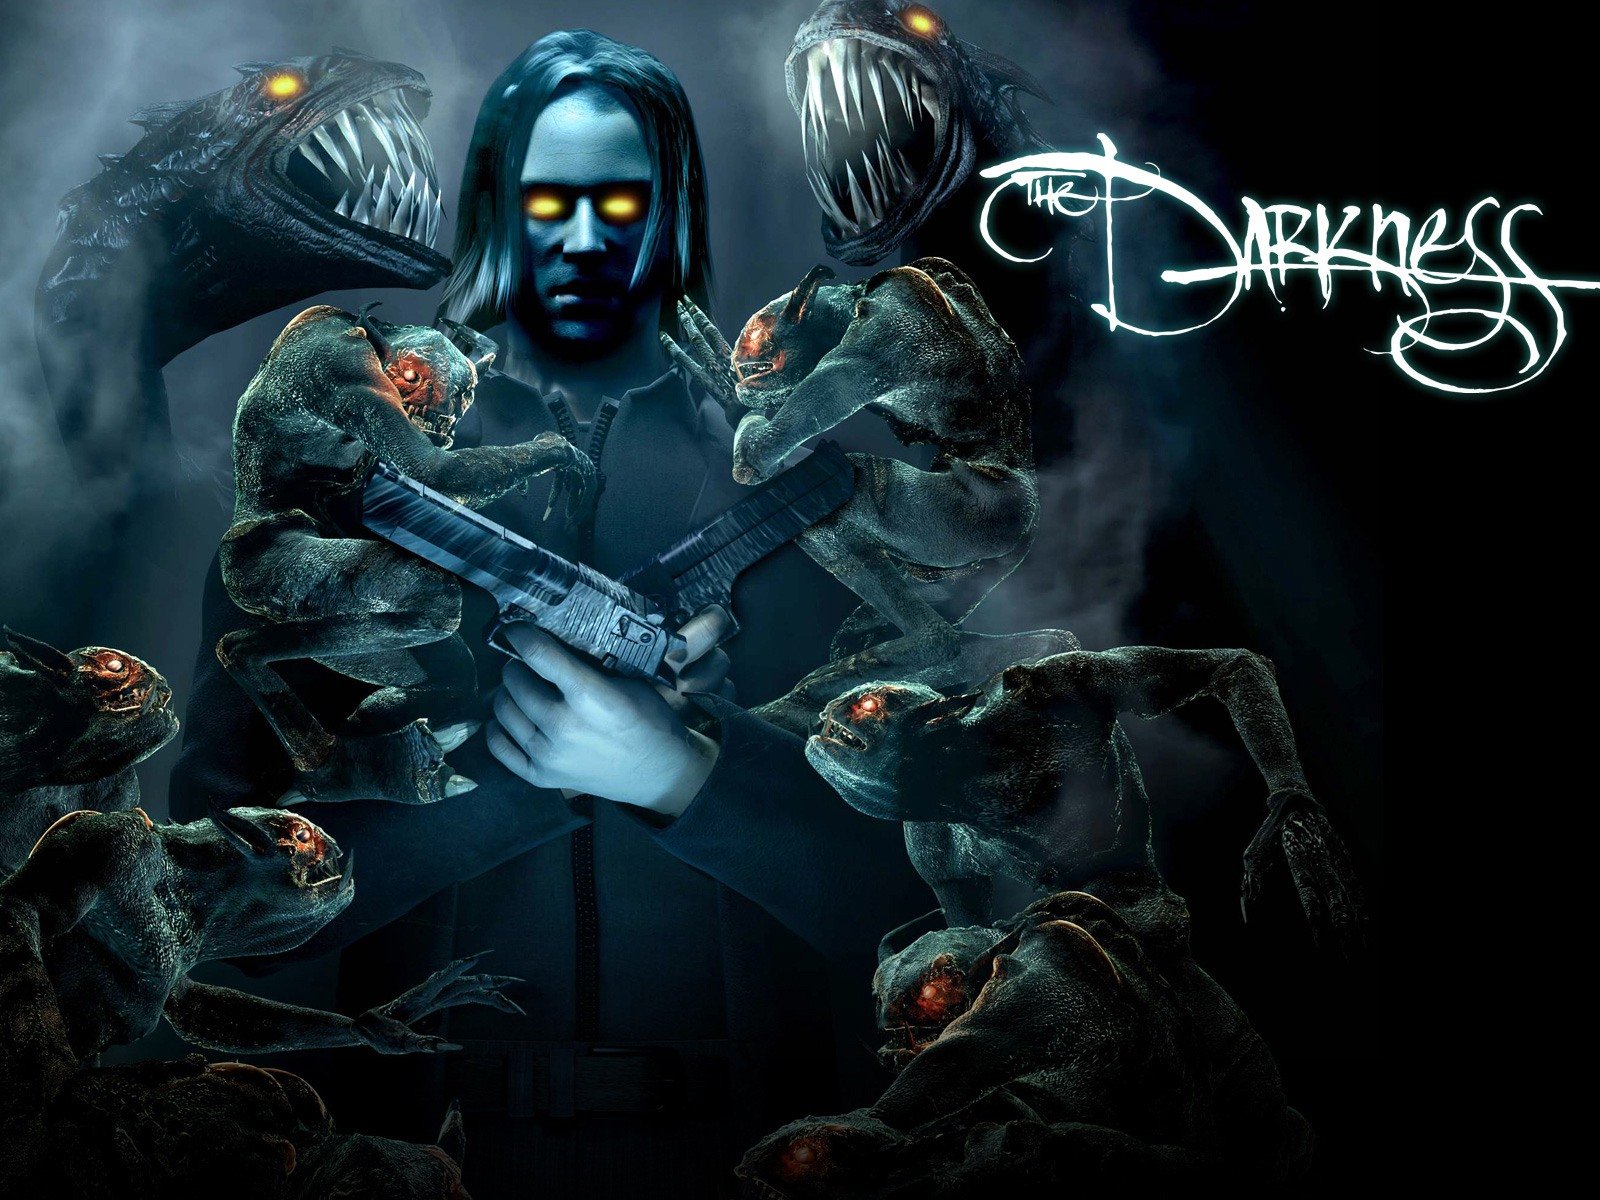  The Darkness  Wallpaper  and Background Image 1600x1200 